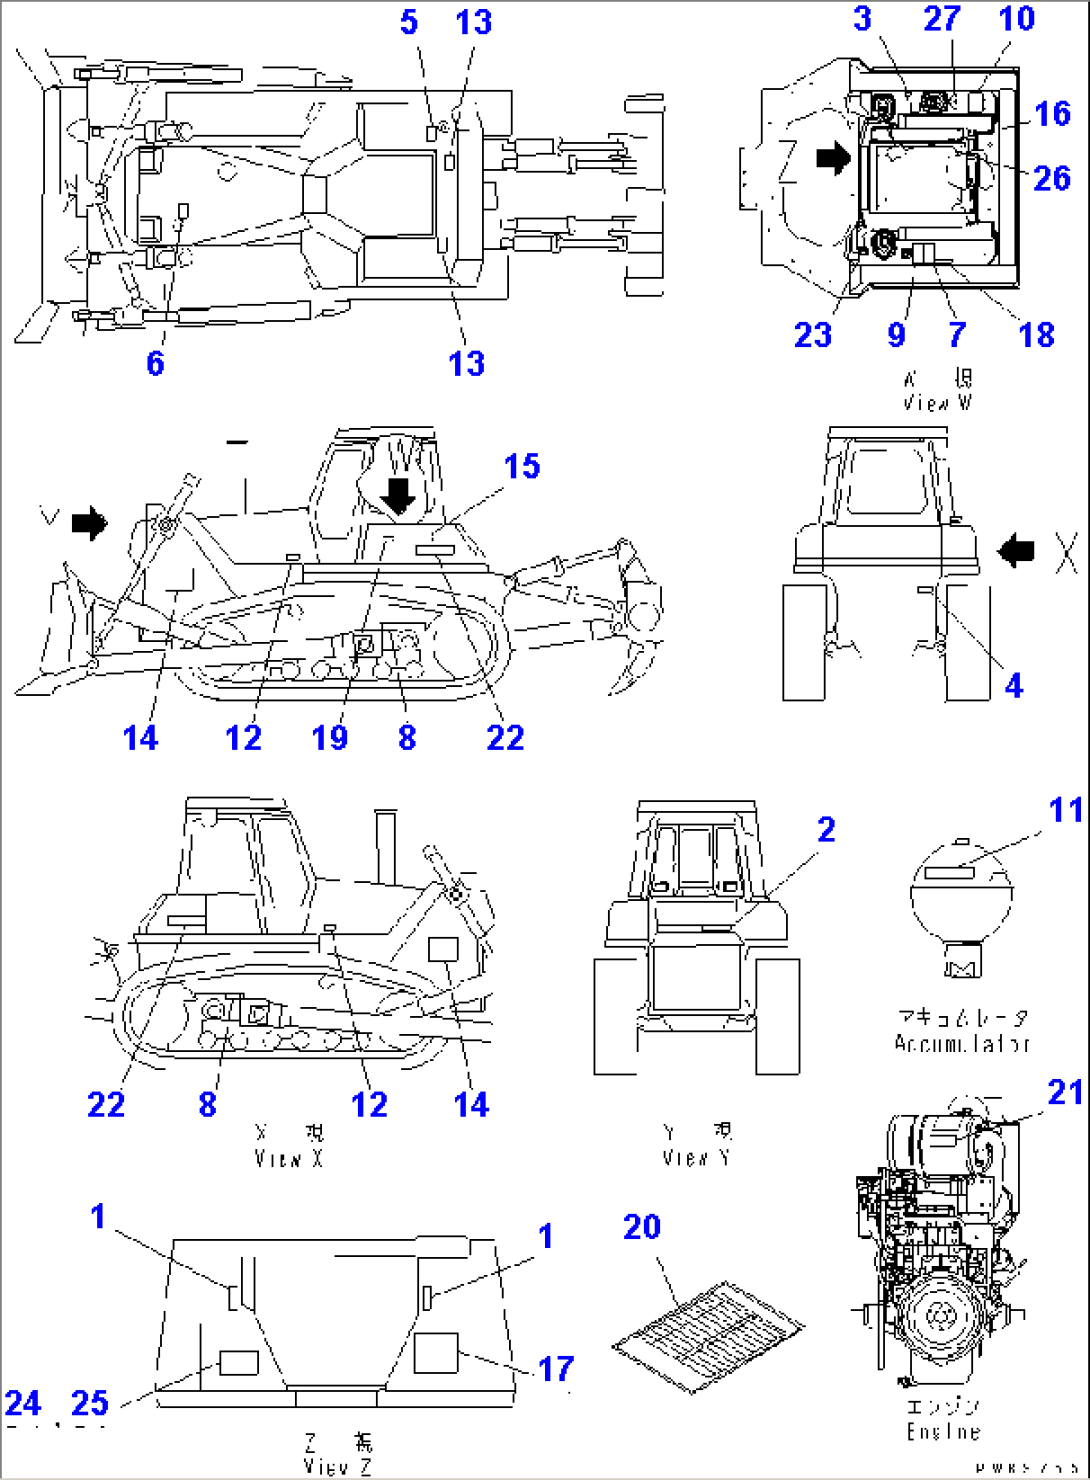 MARKS AND PLATES (GERMAN)(#70001-74999)